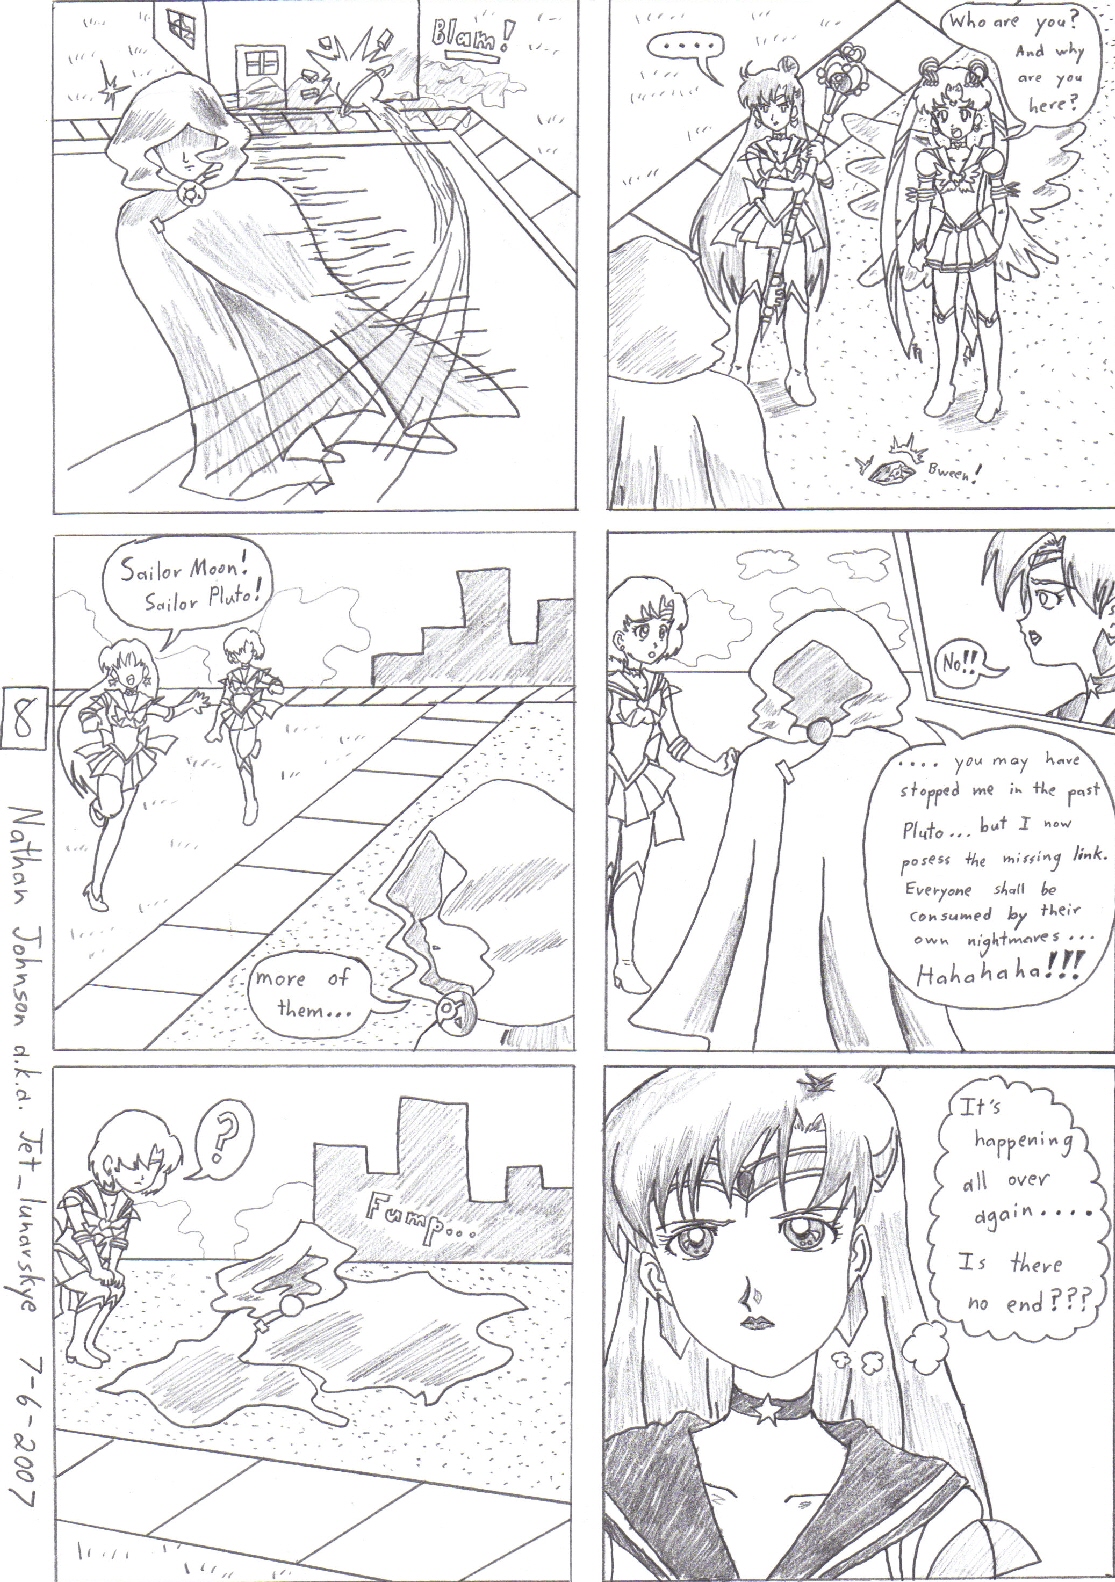 Sailor Moon Stars: The Nightmare Soldier Page 8 by Jet_lunarskye